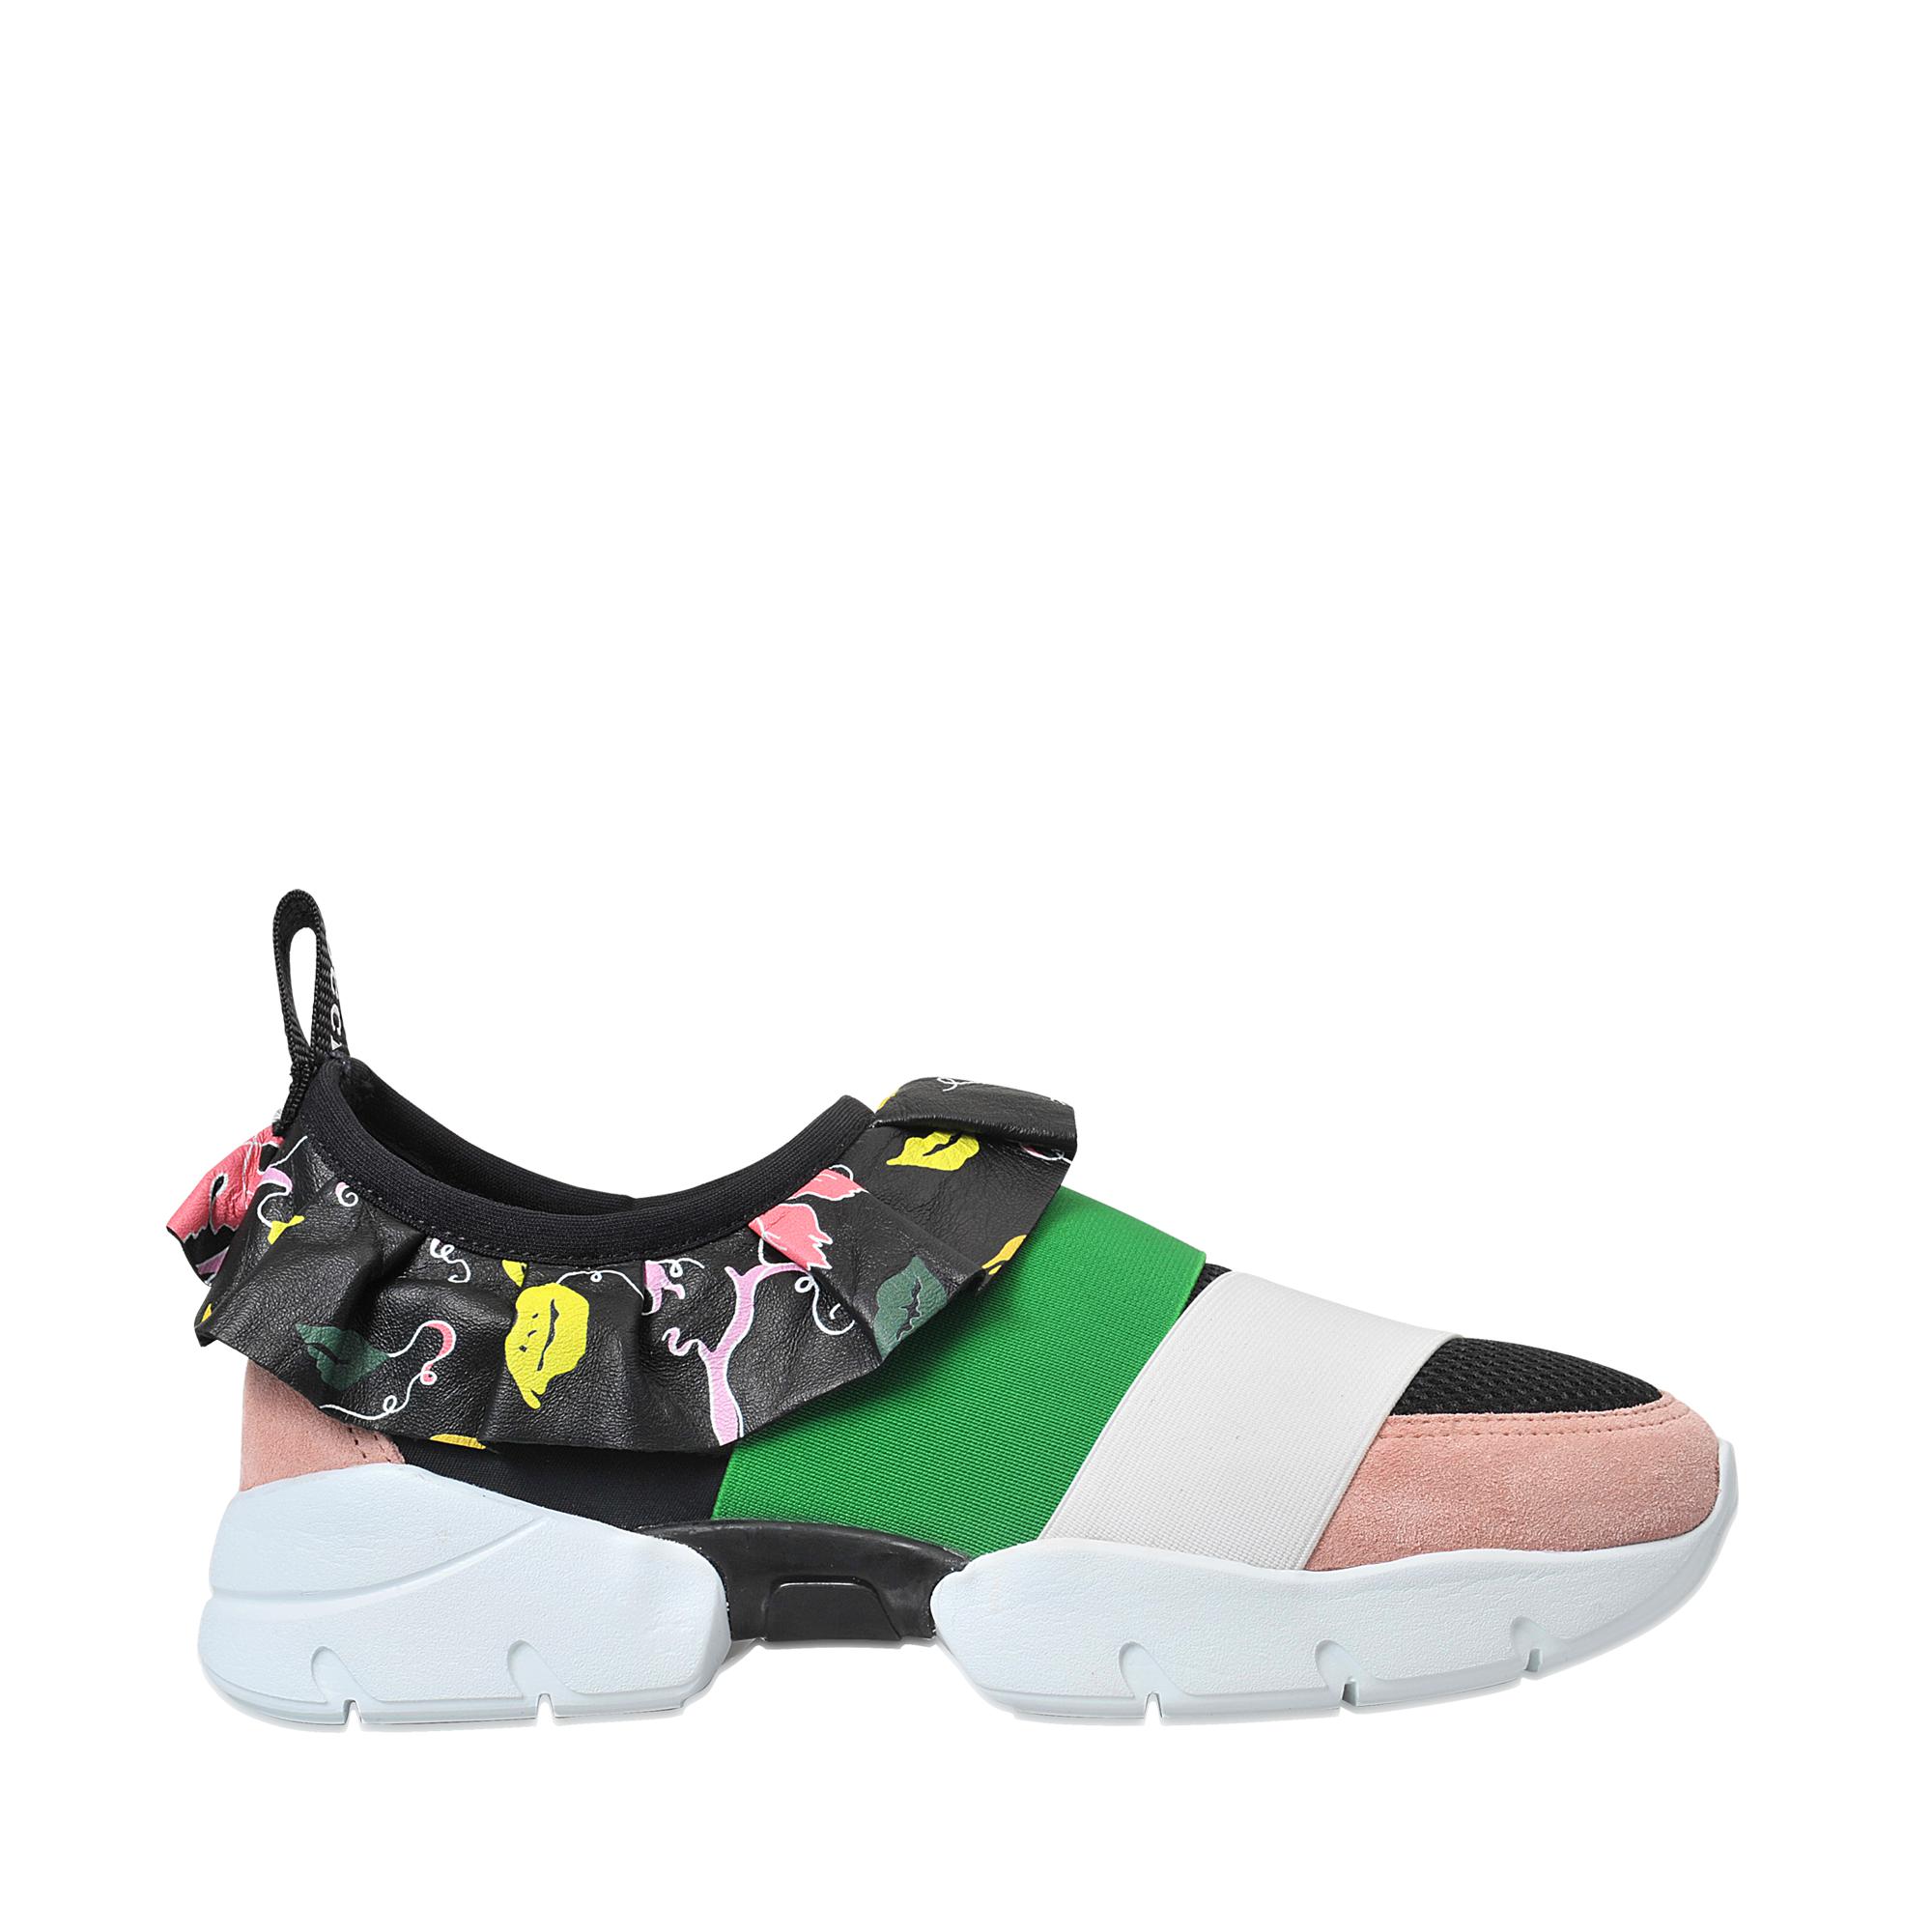 Emilio Pucci Leather Ruffle Sneakers - Lyst